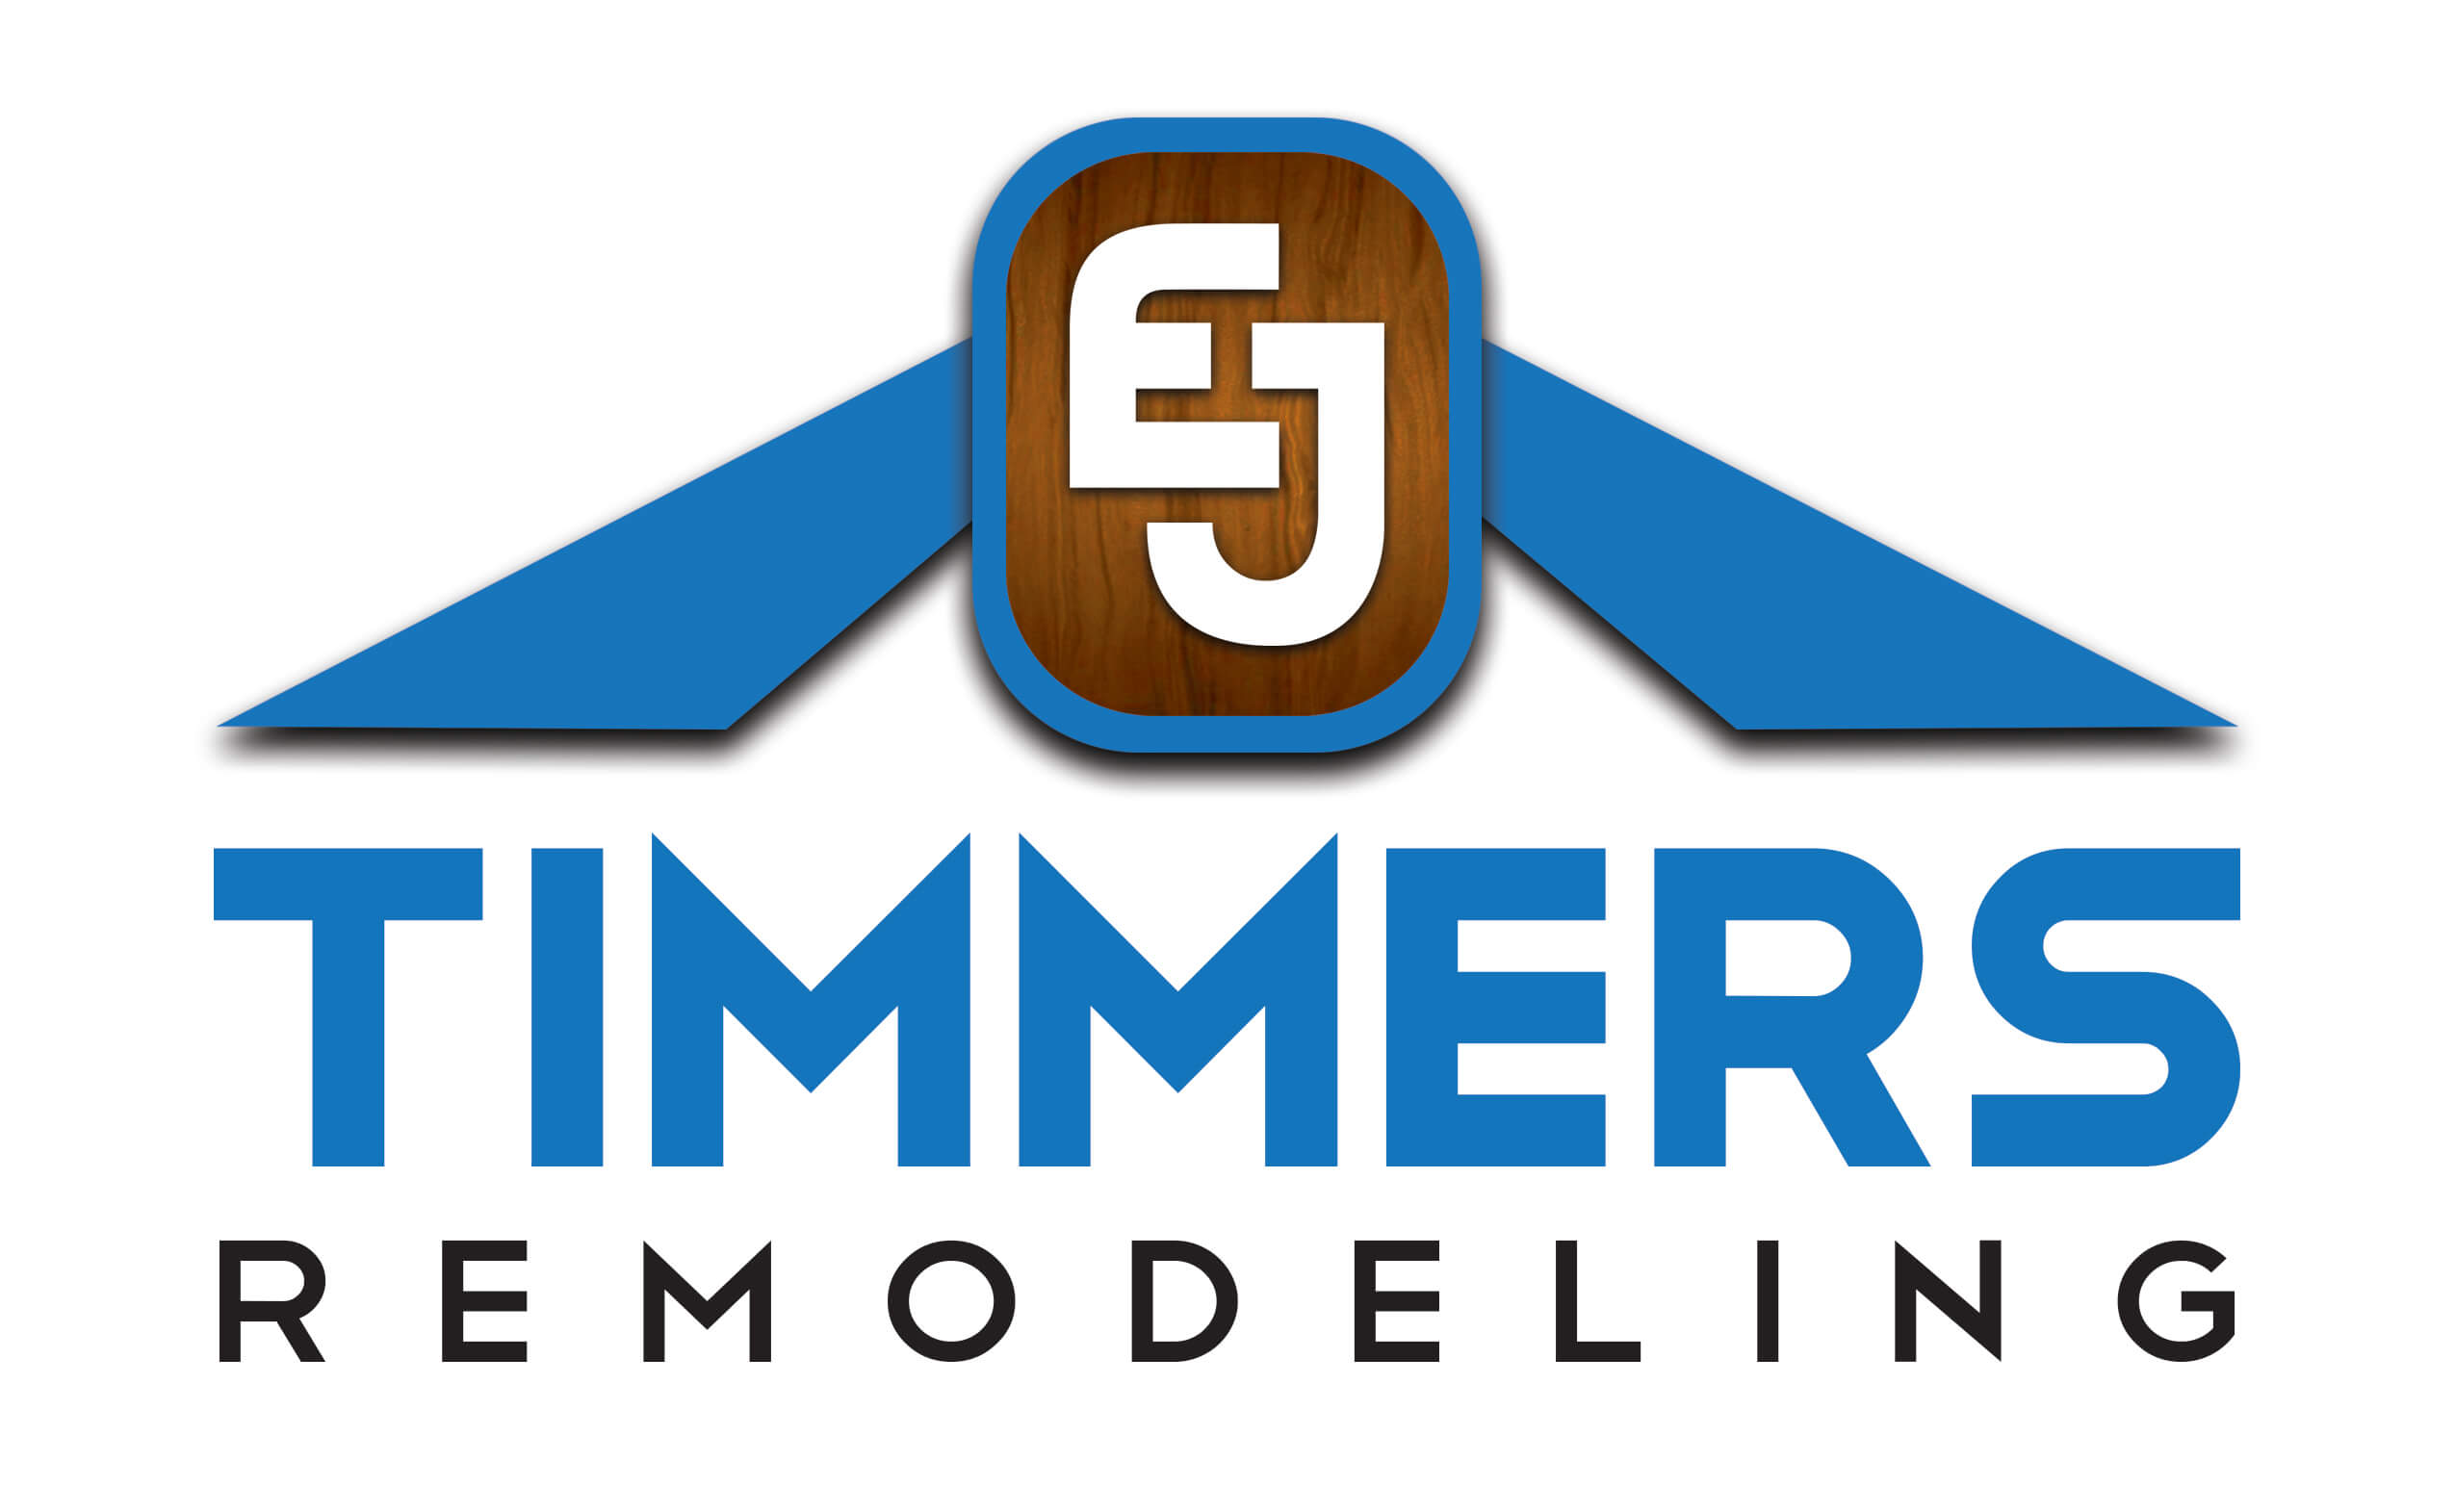 EJ Timmers Remodeling